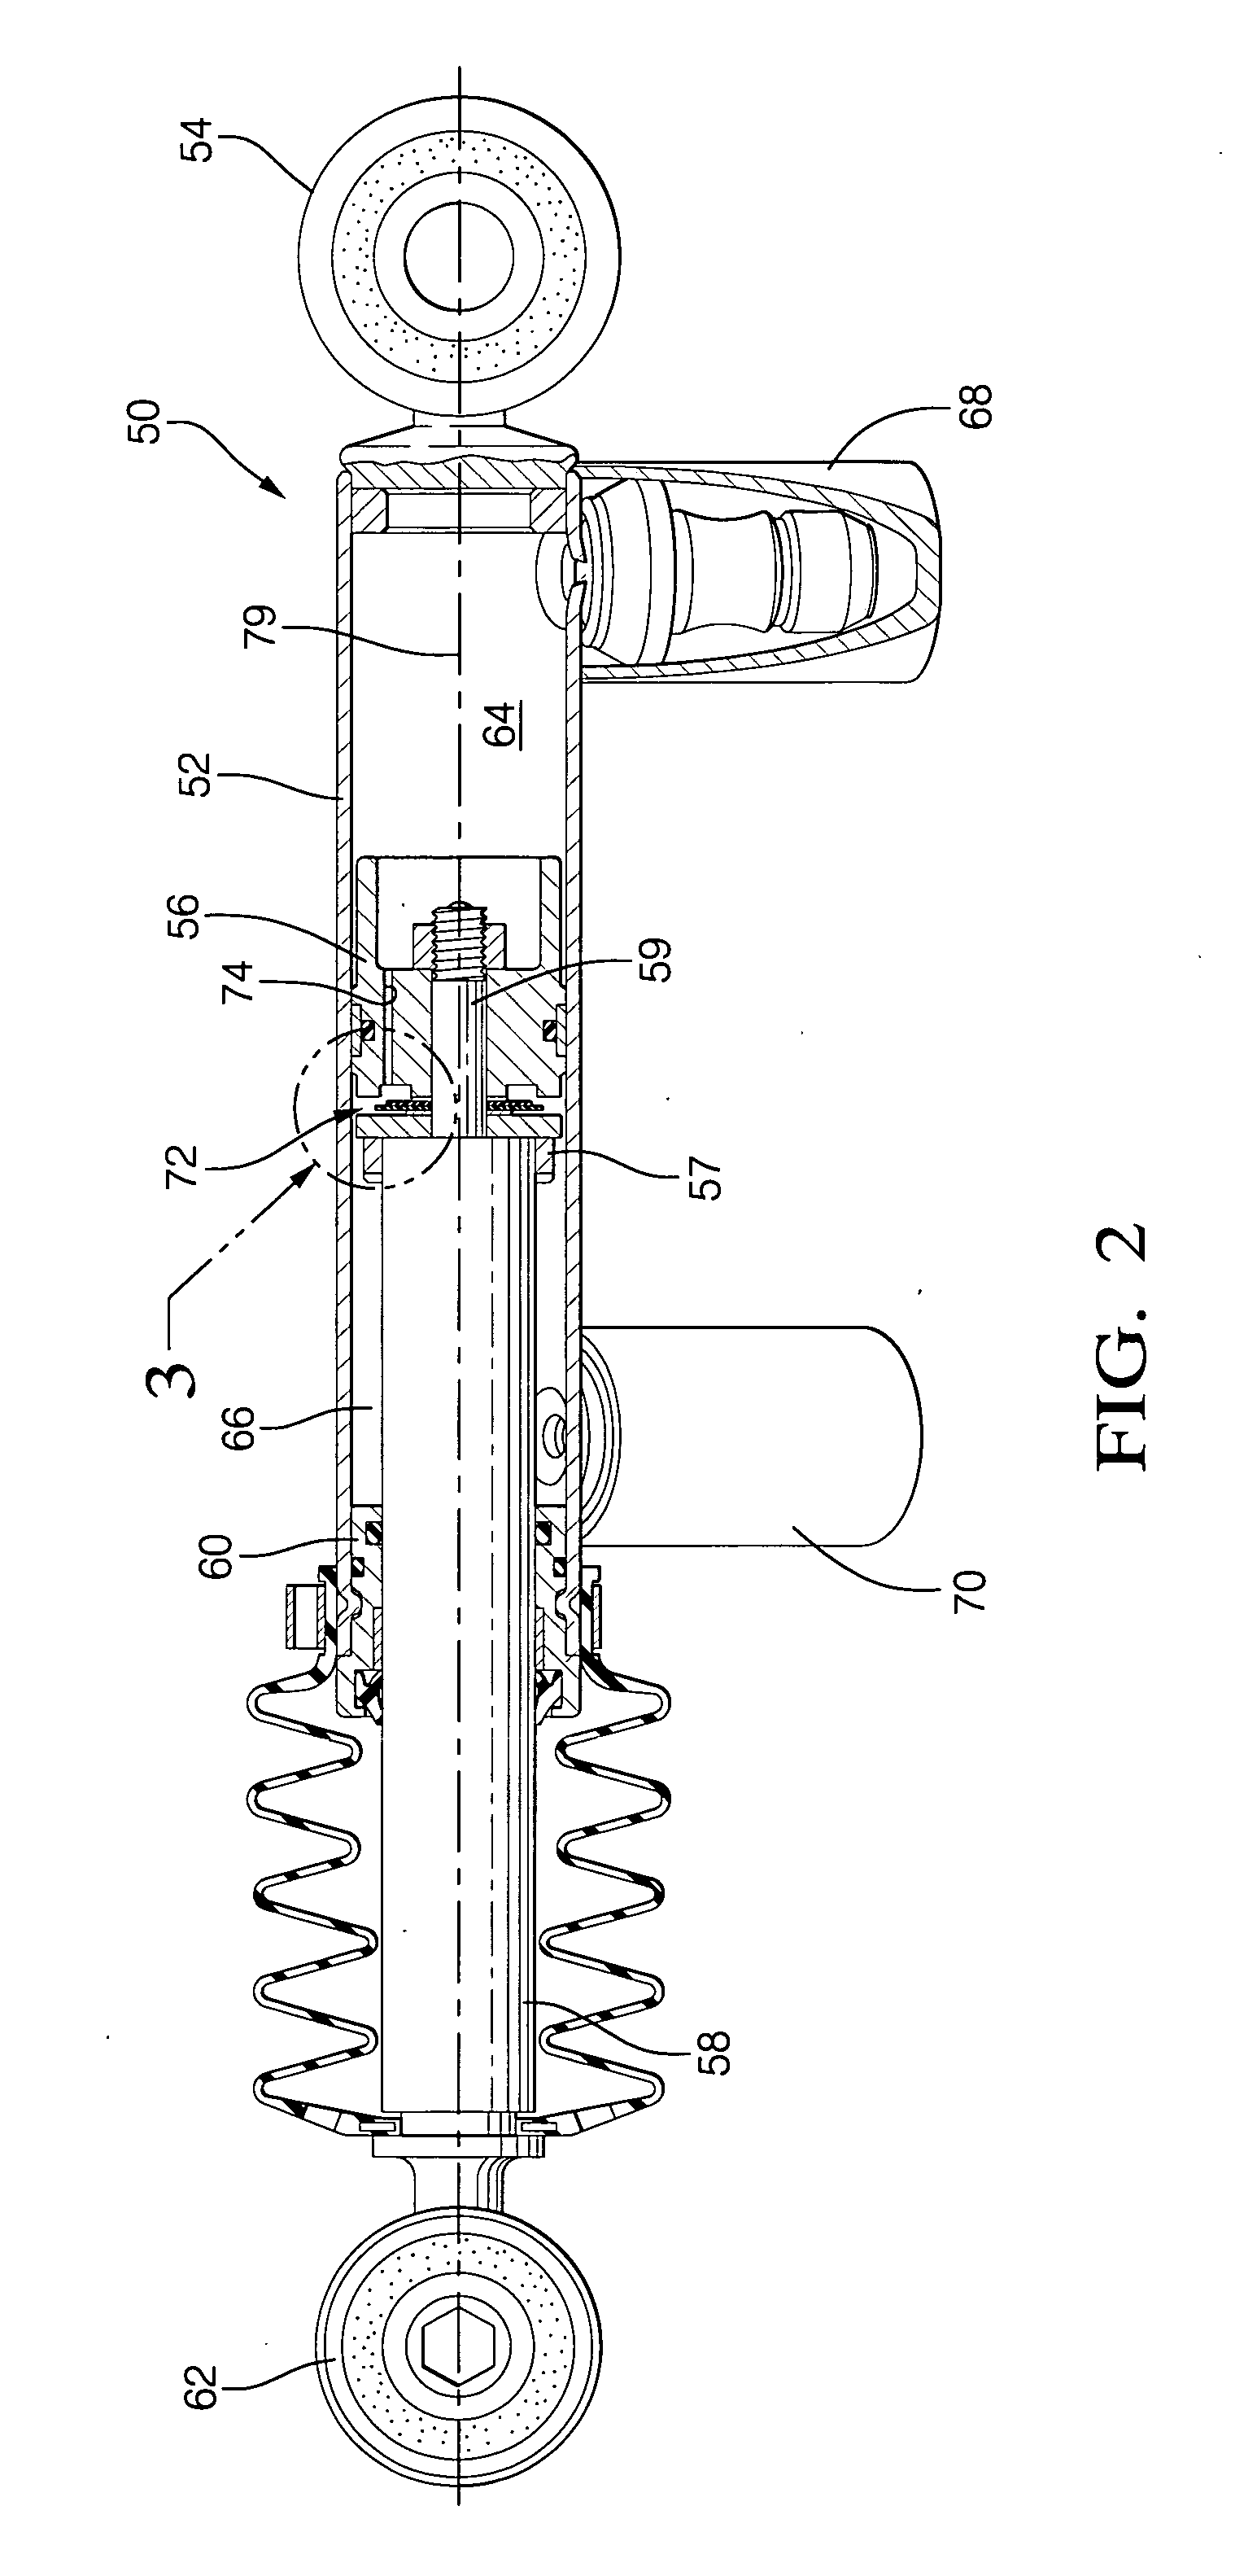 Hydraulic actuator having disc valve assembly